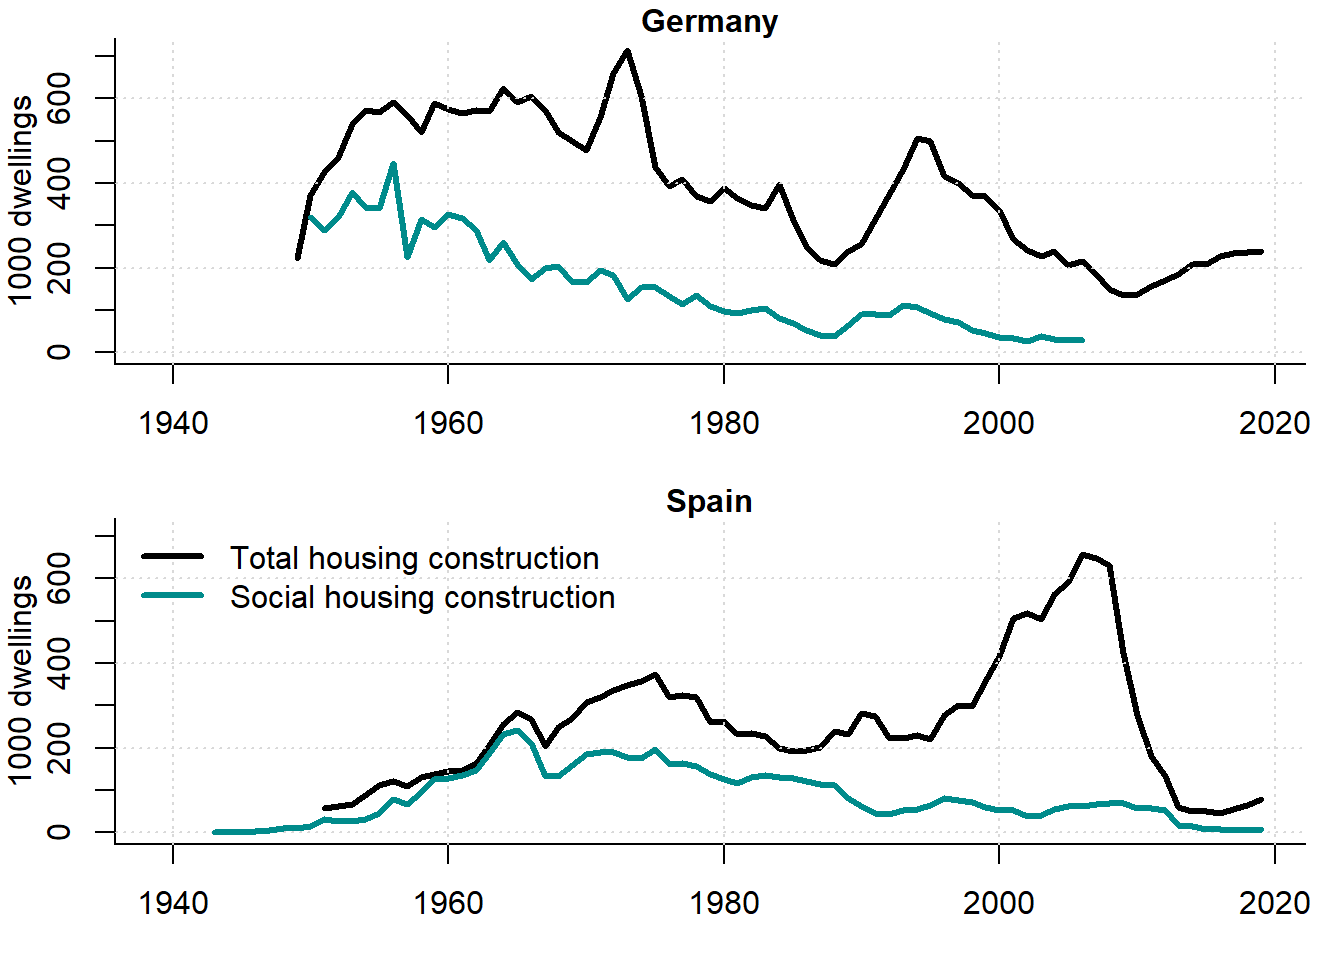 Overall vs. social housing construction in Germany and Spain, 1940--2020